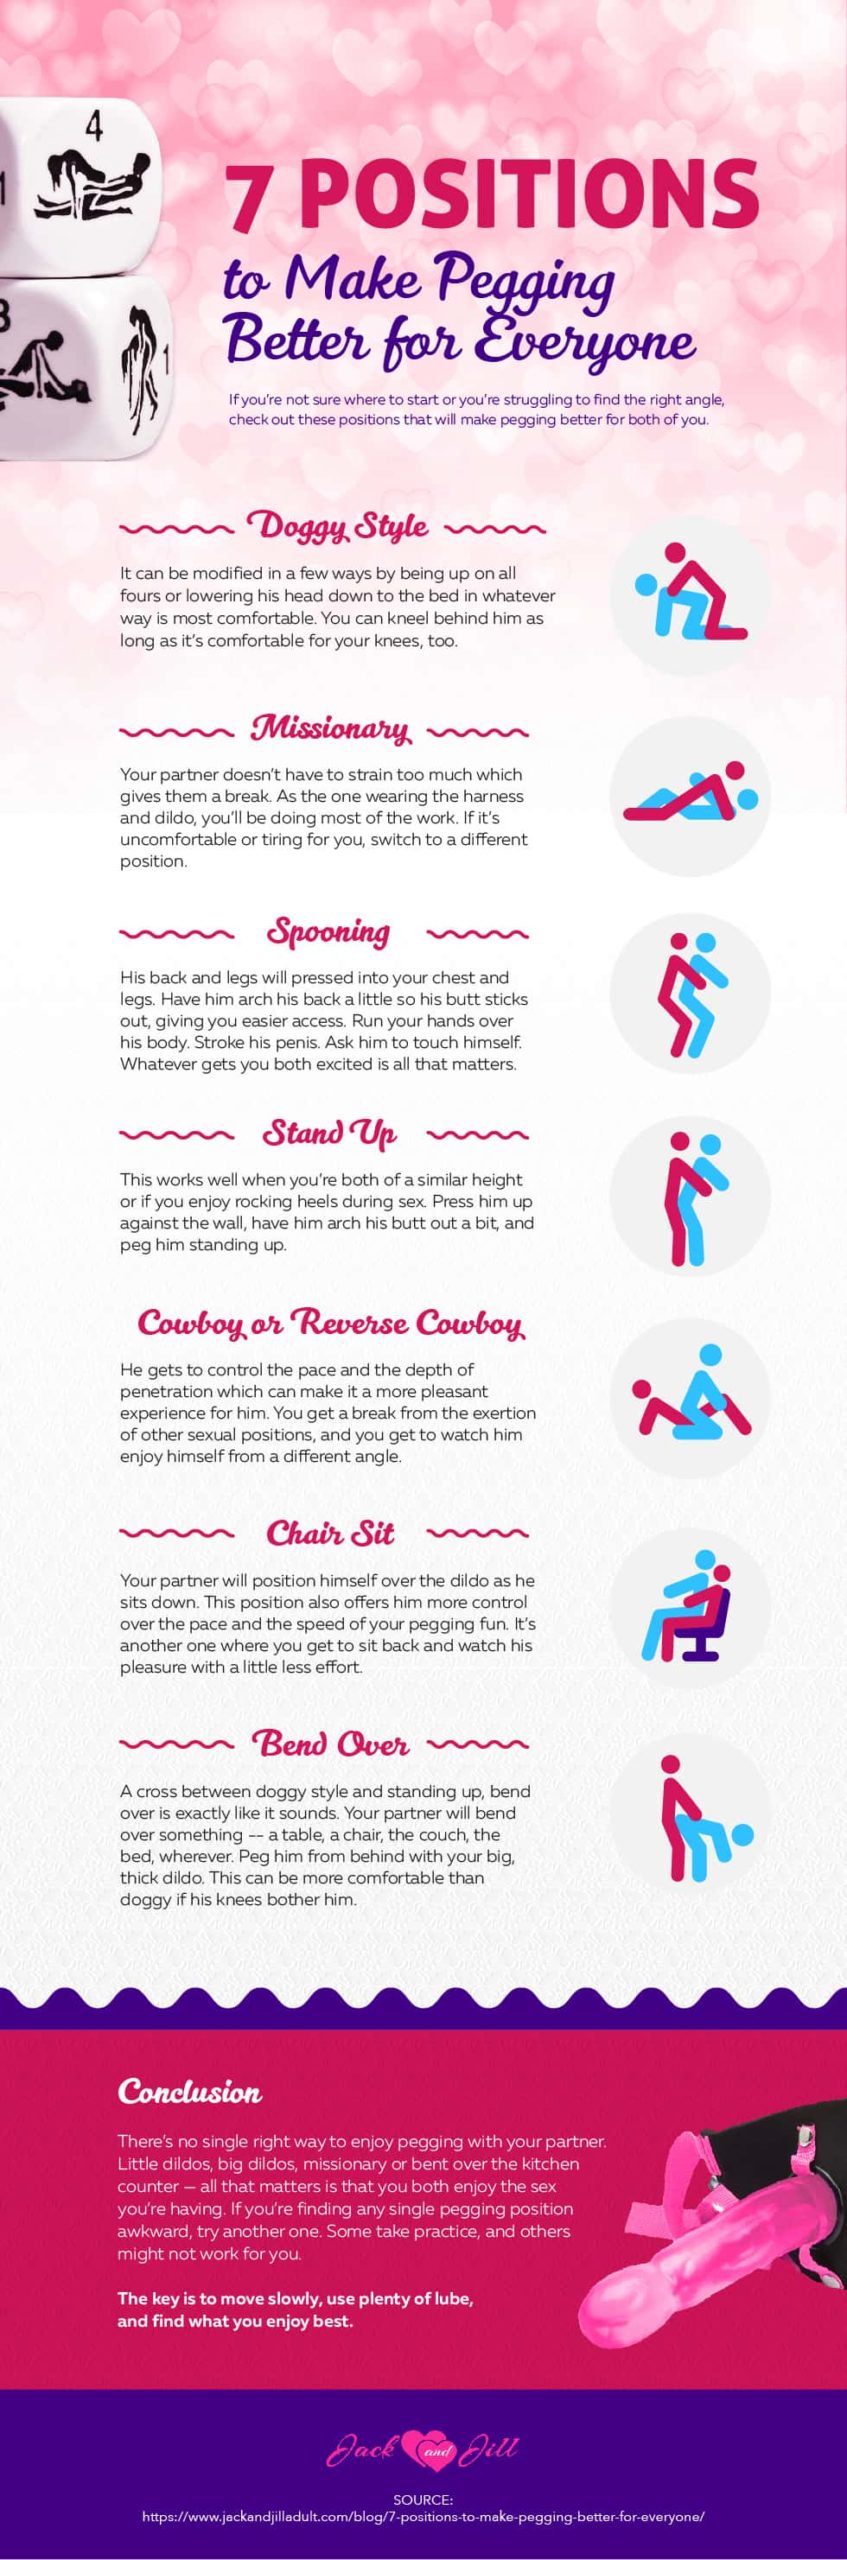 Infographic for 7 Positions to Make Pegging Better for Everyone